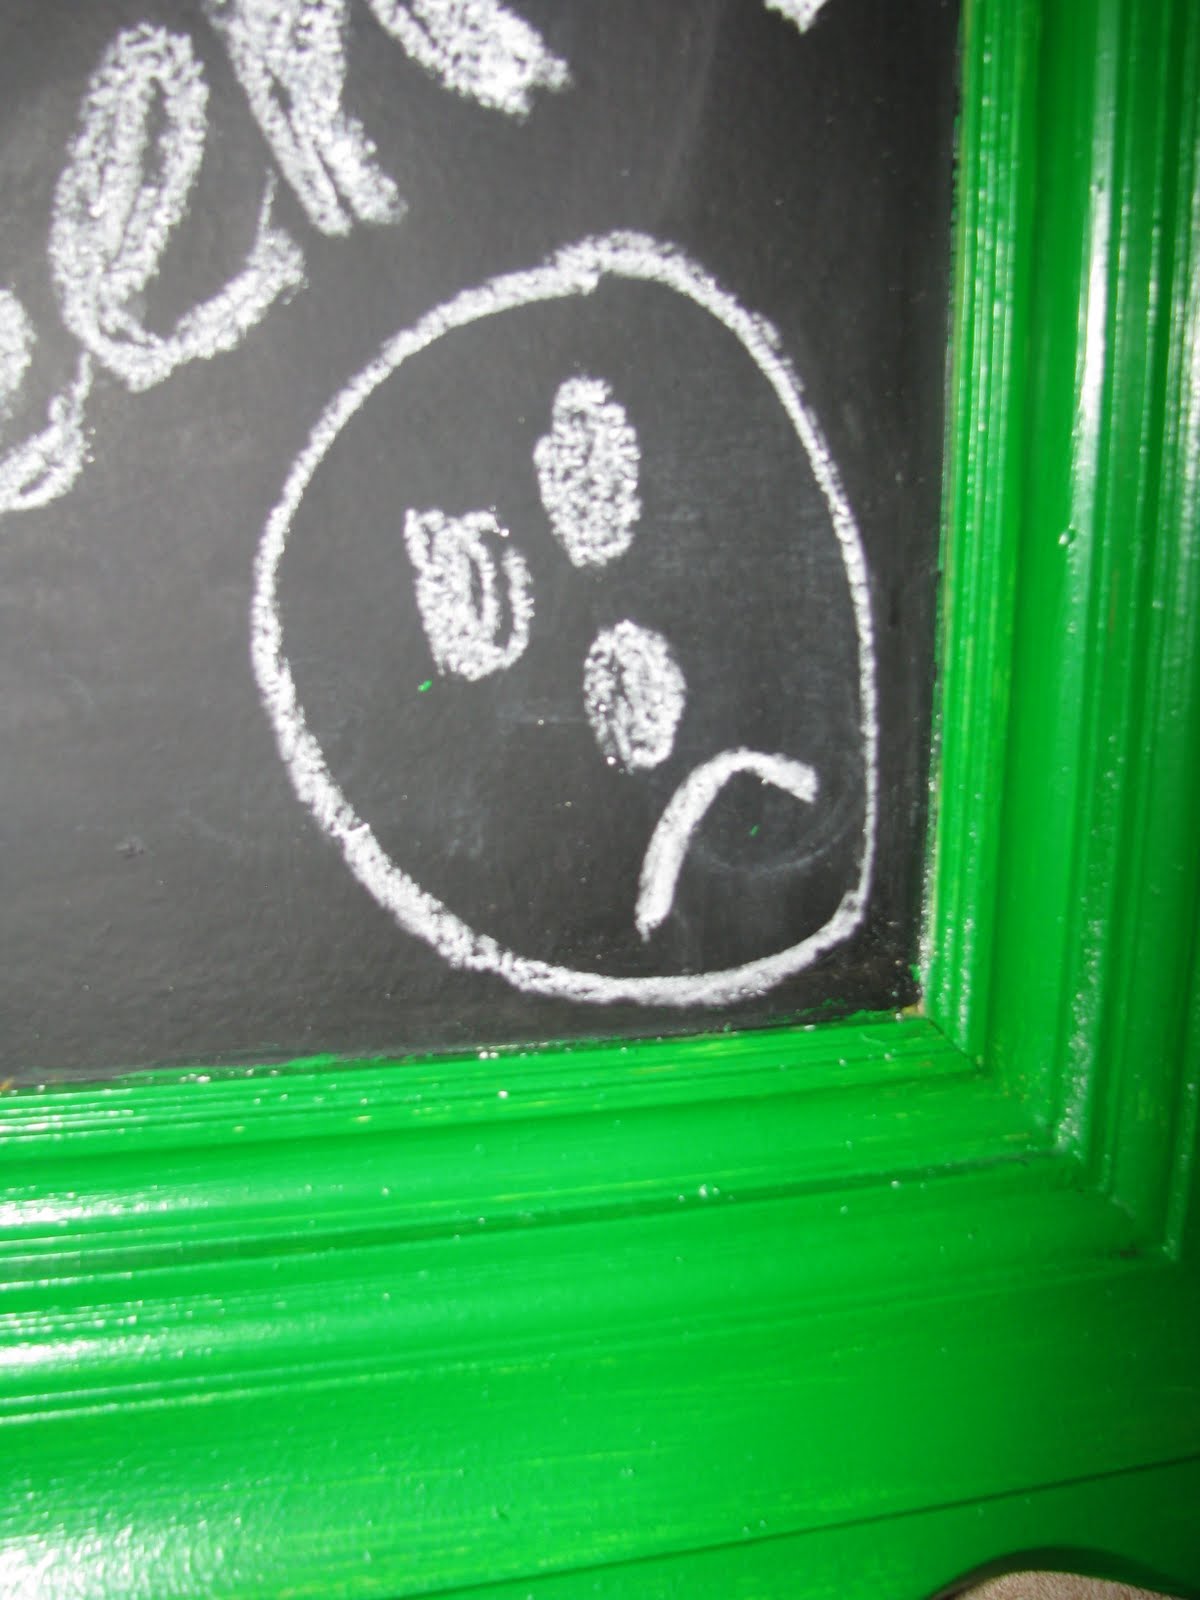 Repainting my chalkboard- what was I thinking?